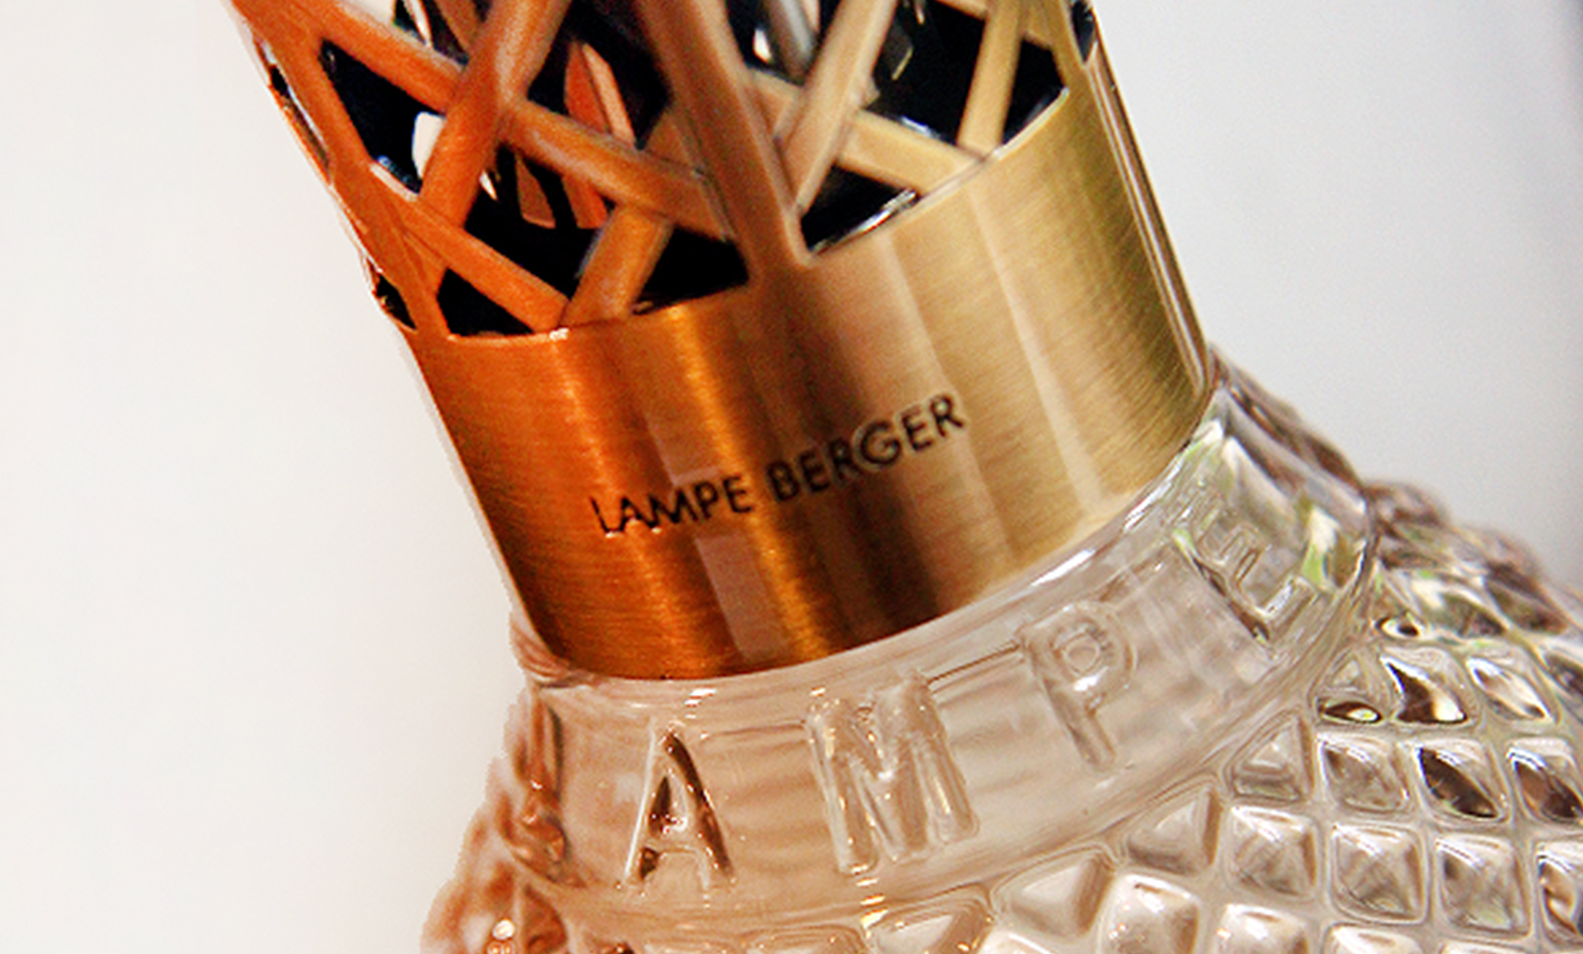 OFFICIAL LAMPE BERGER STORE - MAISON BERGER – OFFICIAL LAMPE